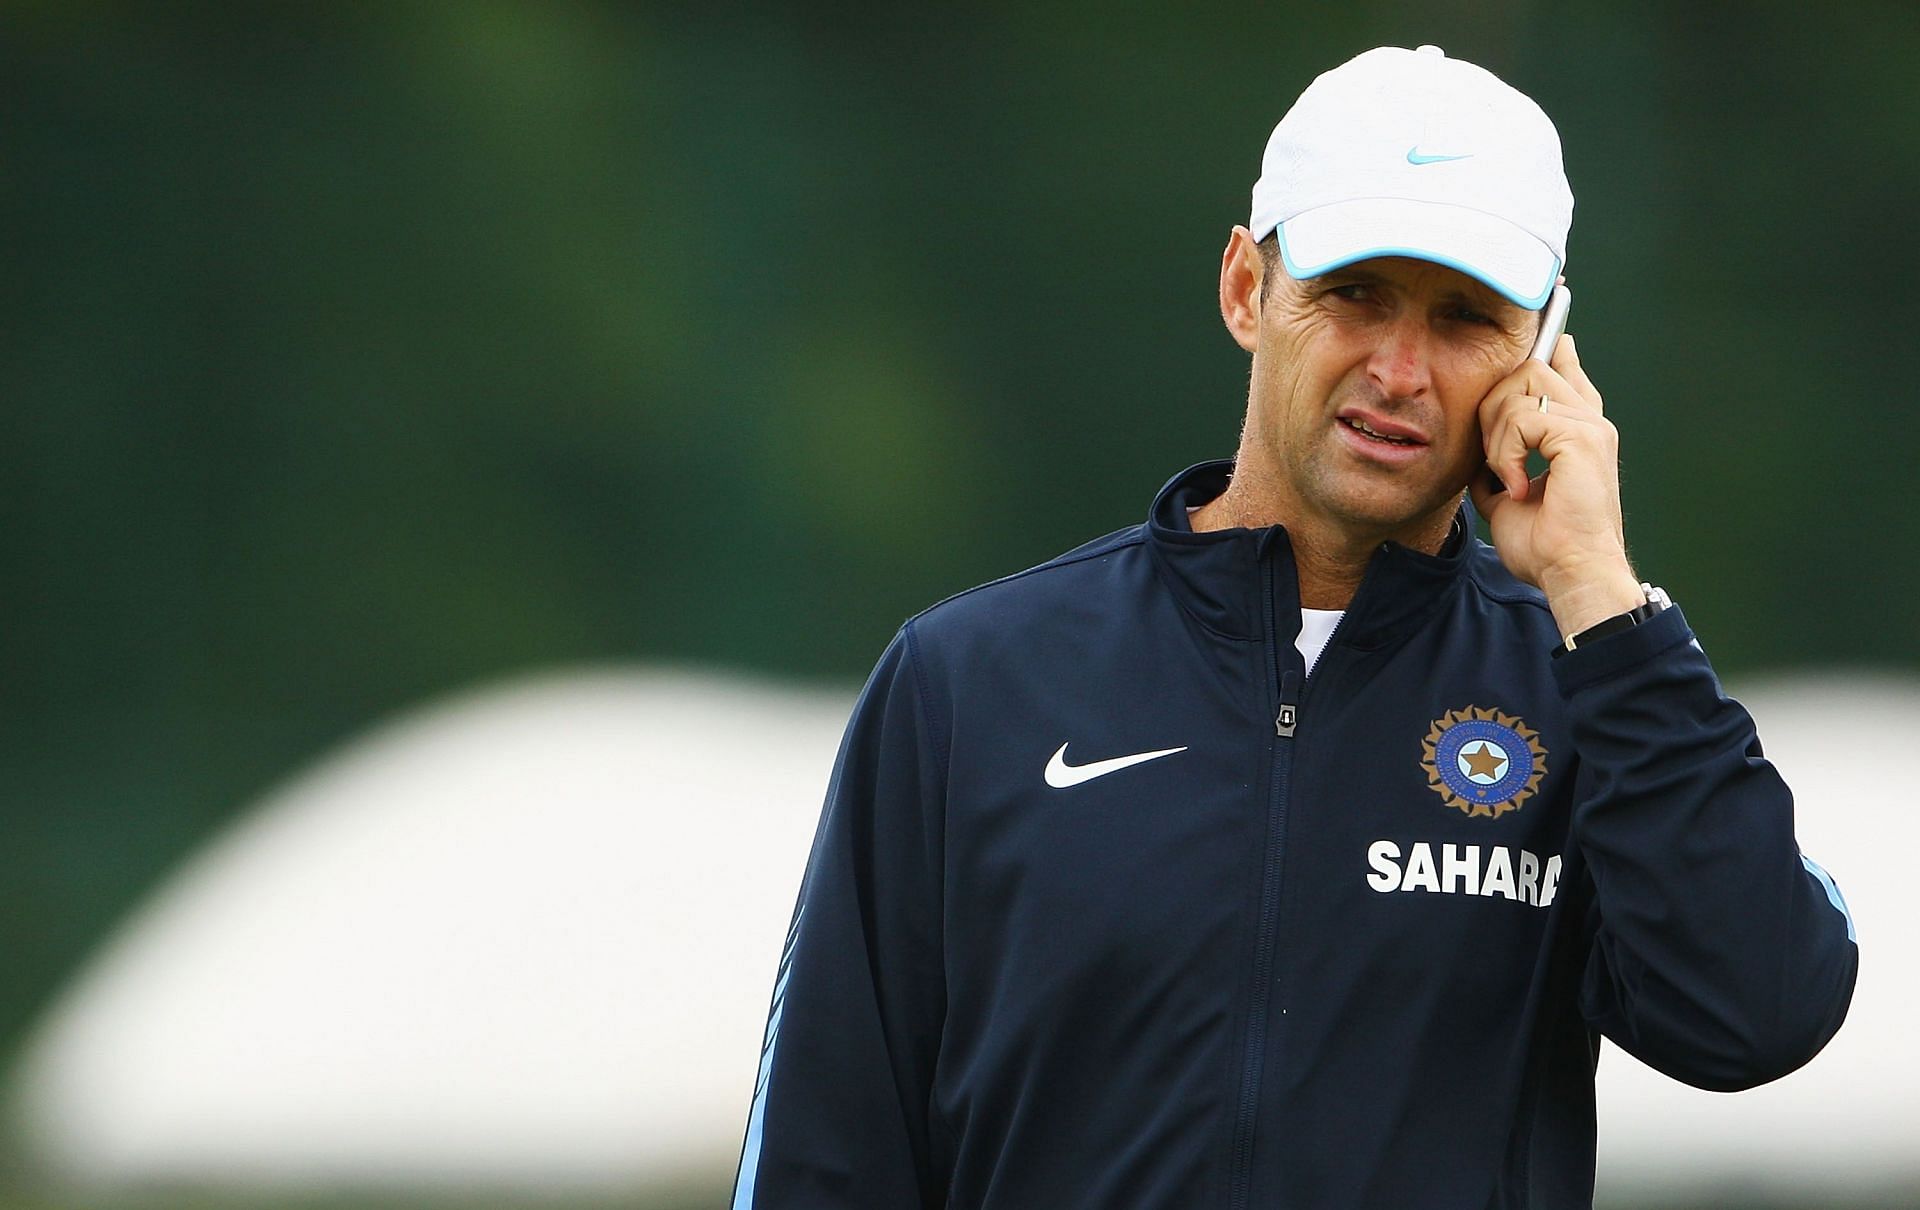 Gary Kirsten has coached India and South Africa in the past